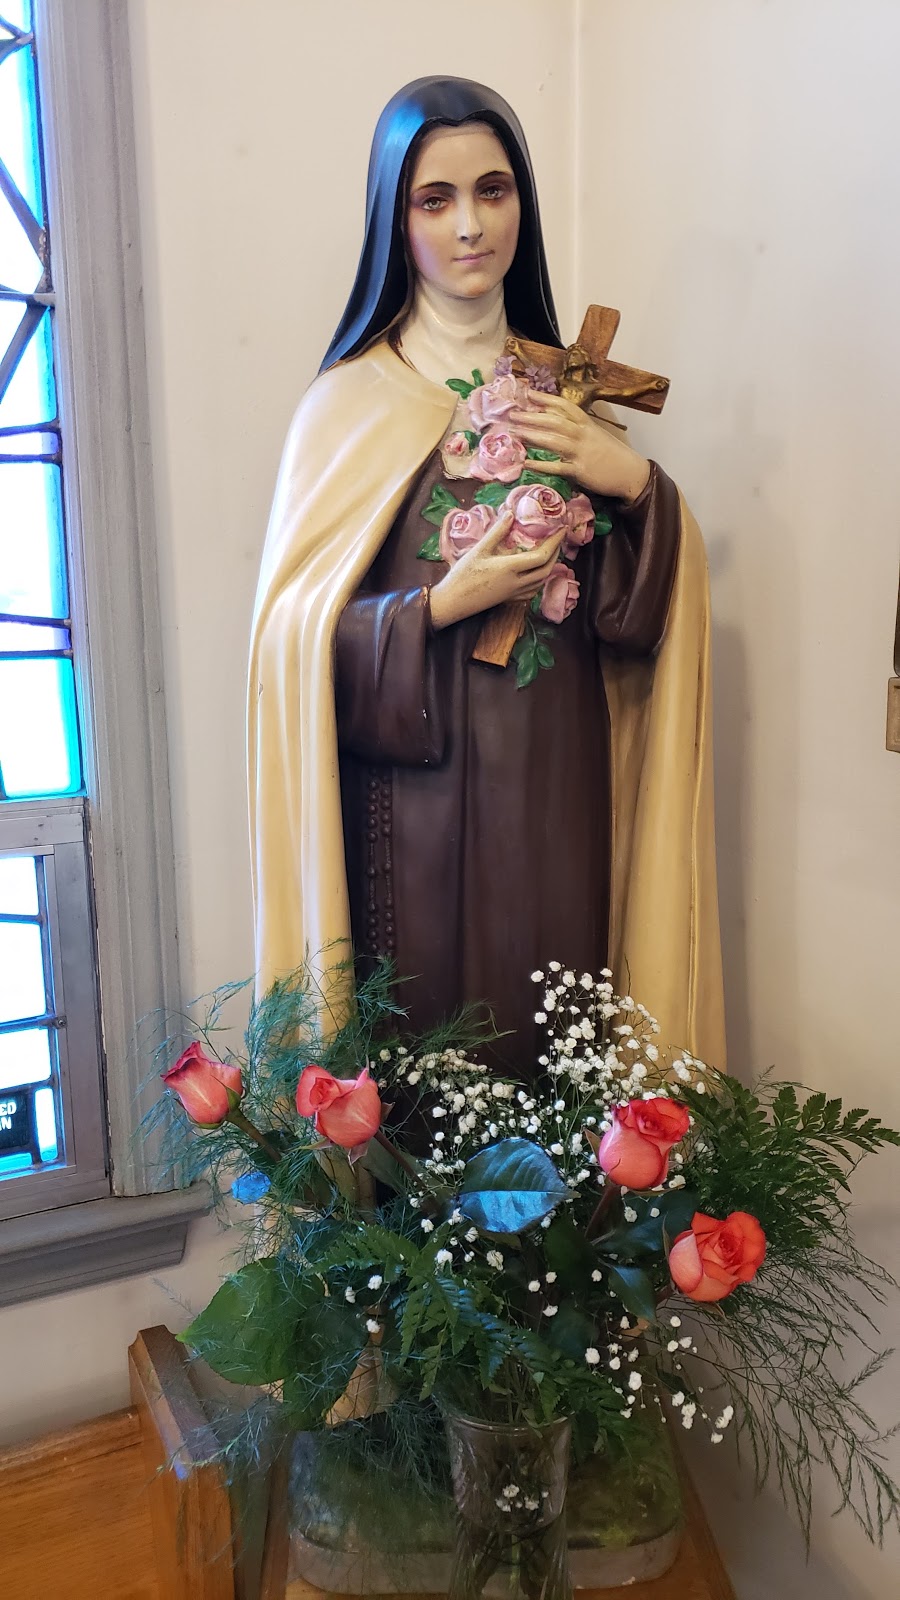 Our Lady of Fatima Chapel and Rectory | 32 W Franklin Ave, Pequannock Township, NJ 07440 | Phone: (973) 694-6727